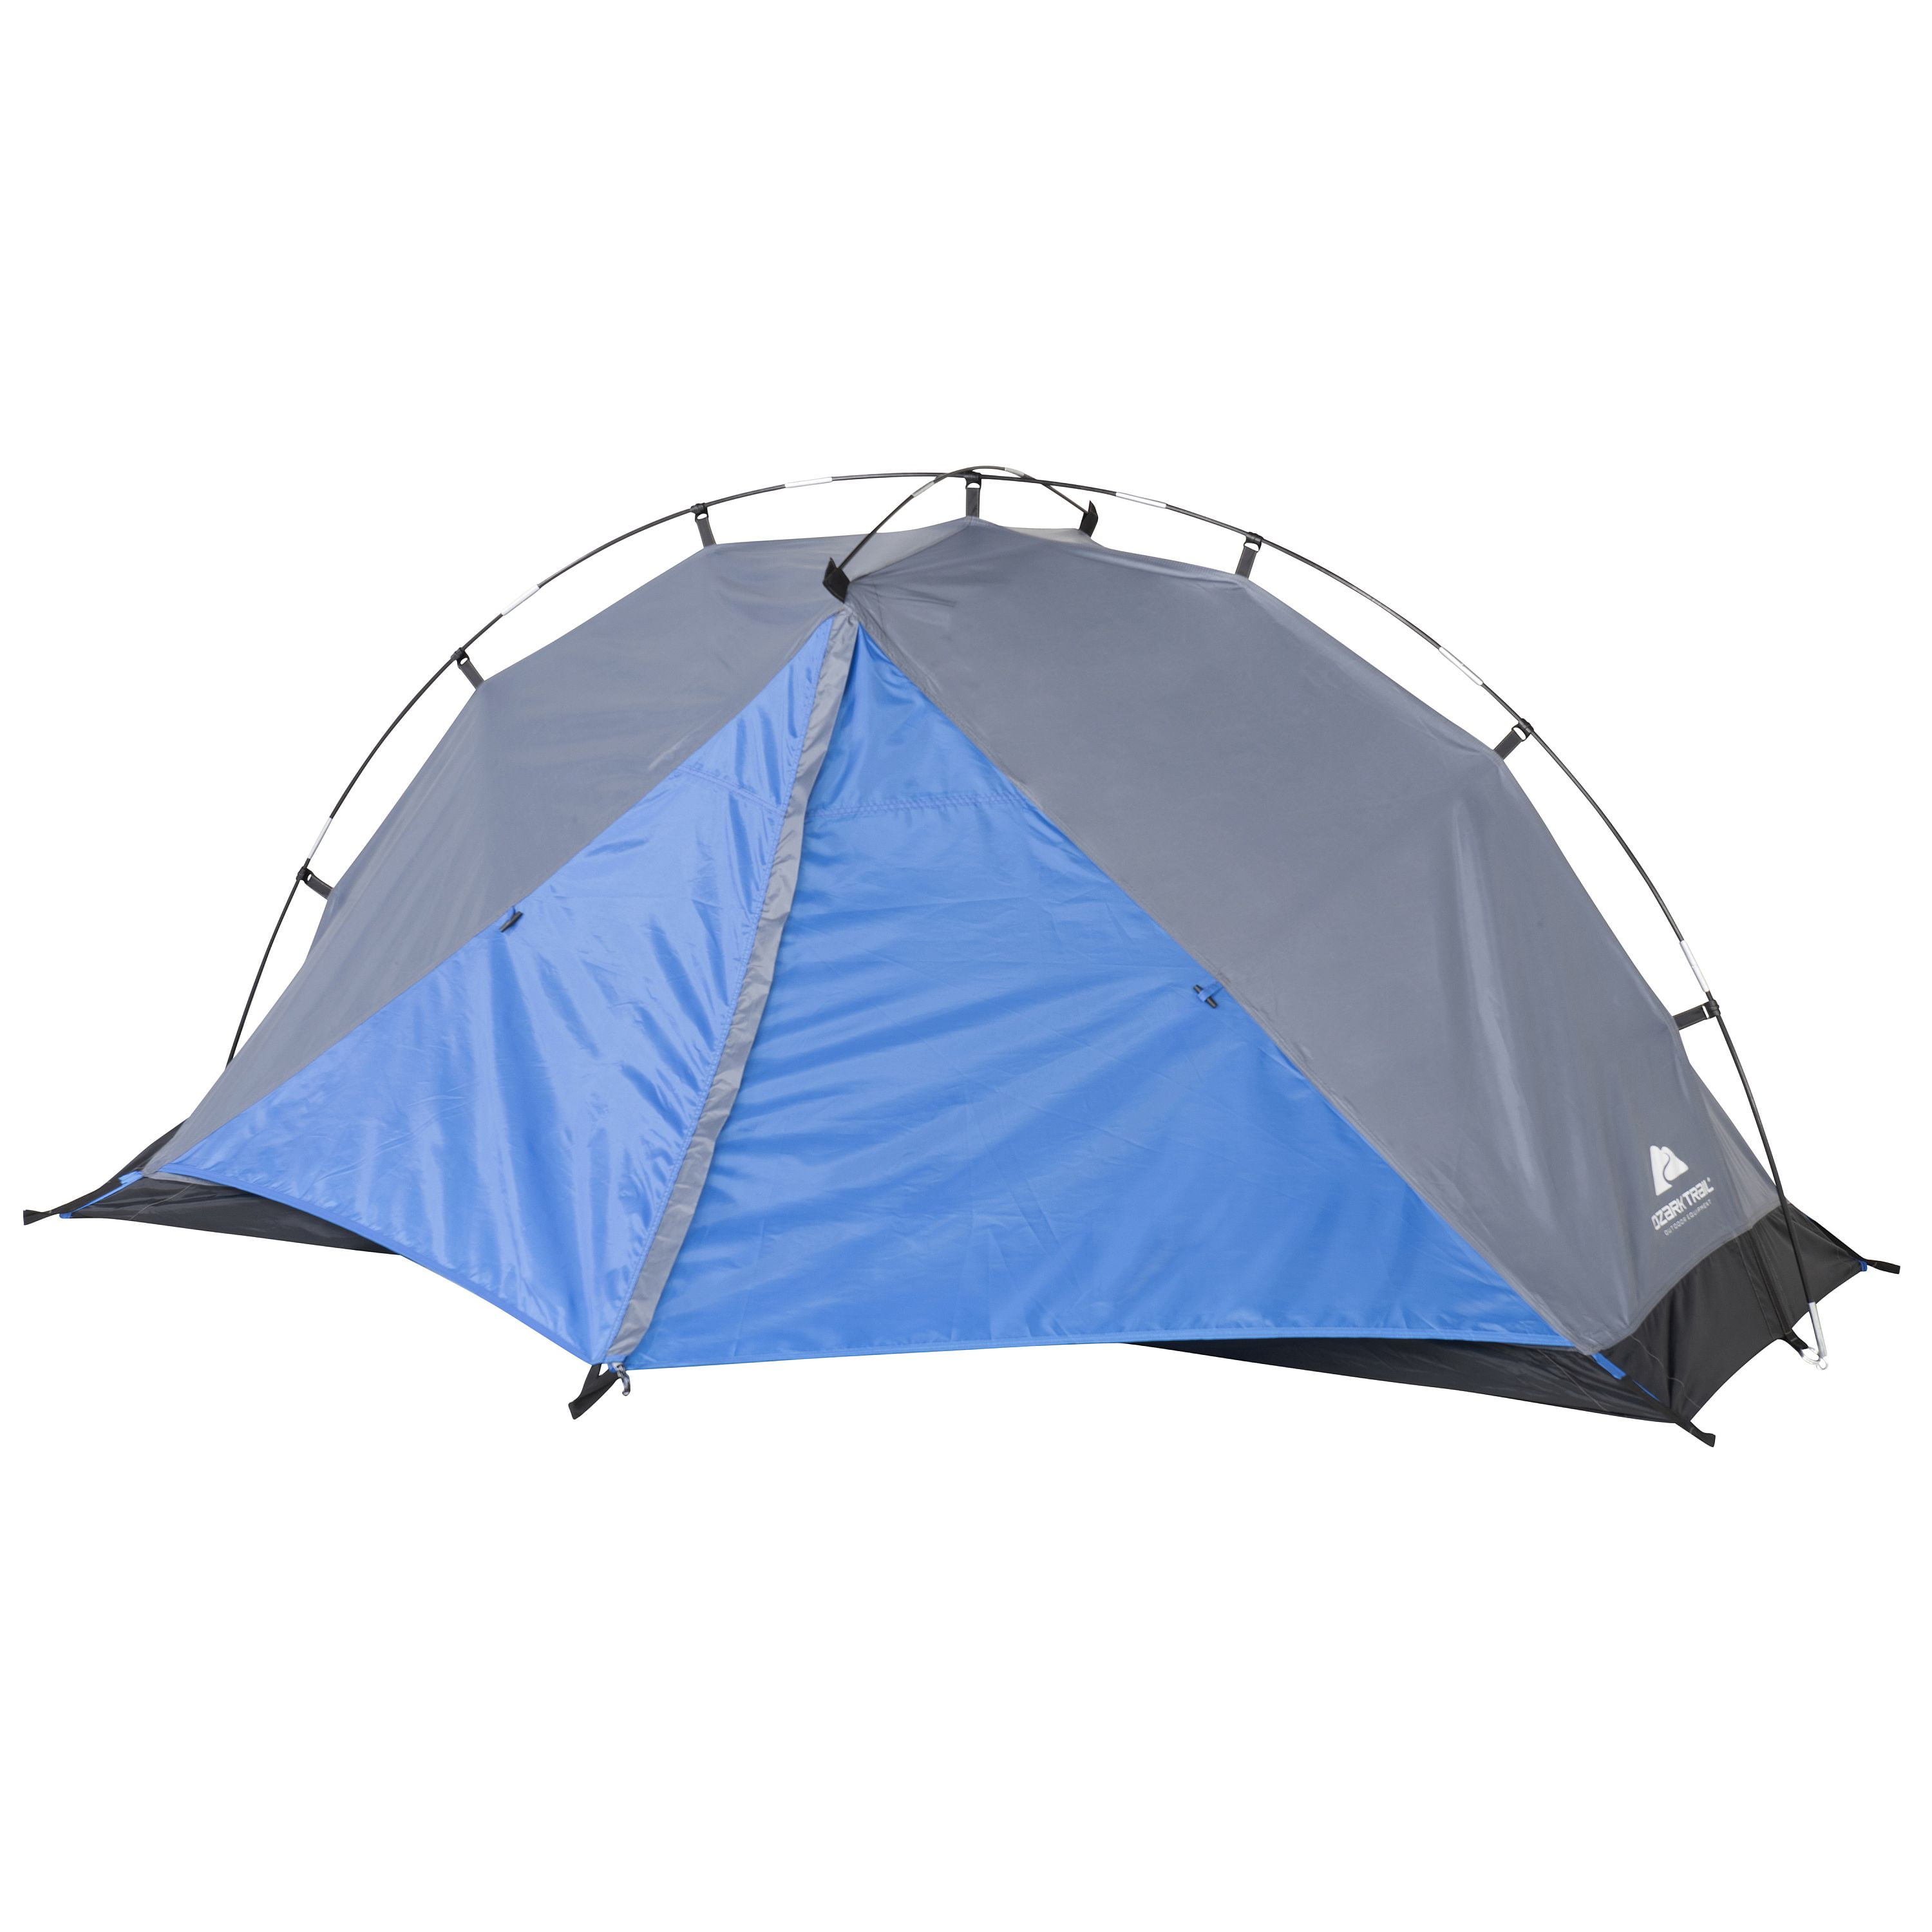 Arabisch picknick Madeliefje Ozark Trail 1-Person Backpacking Tent, with Vestibule for Gear Storage -  Walmart.com